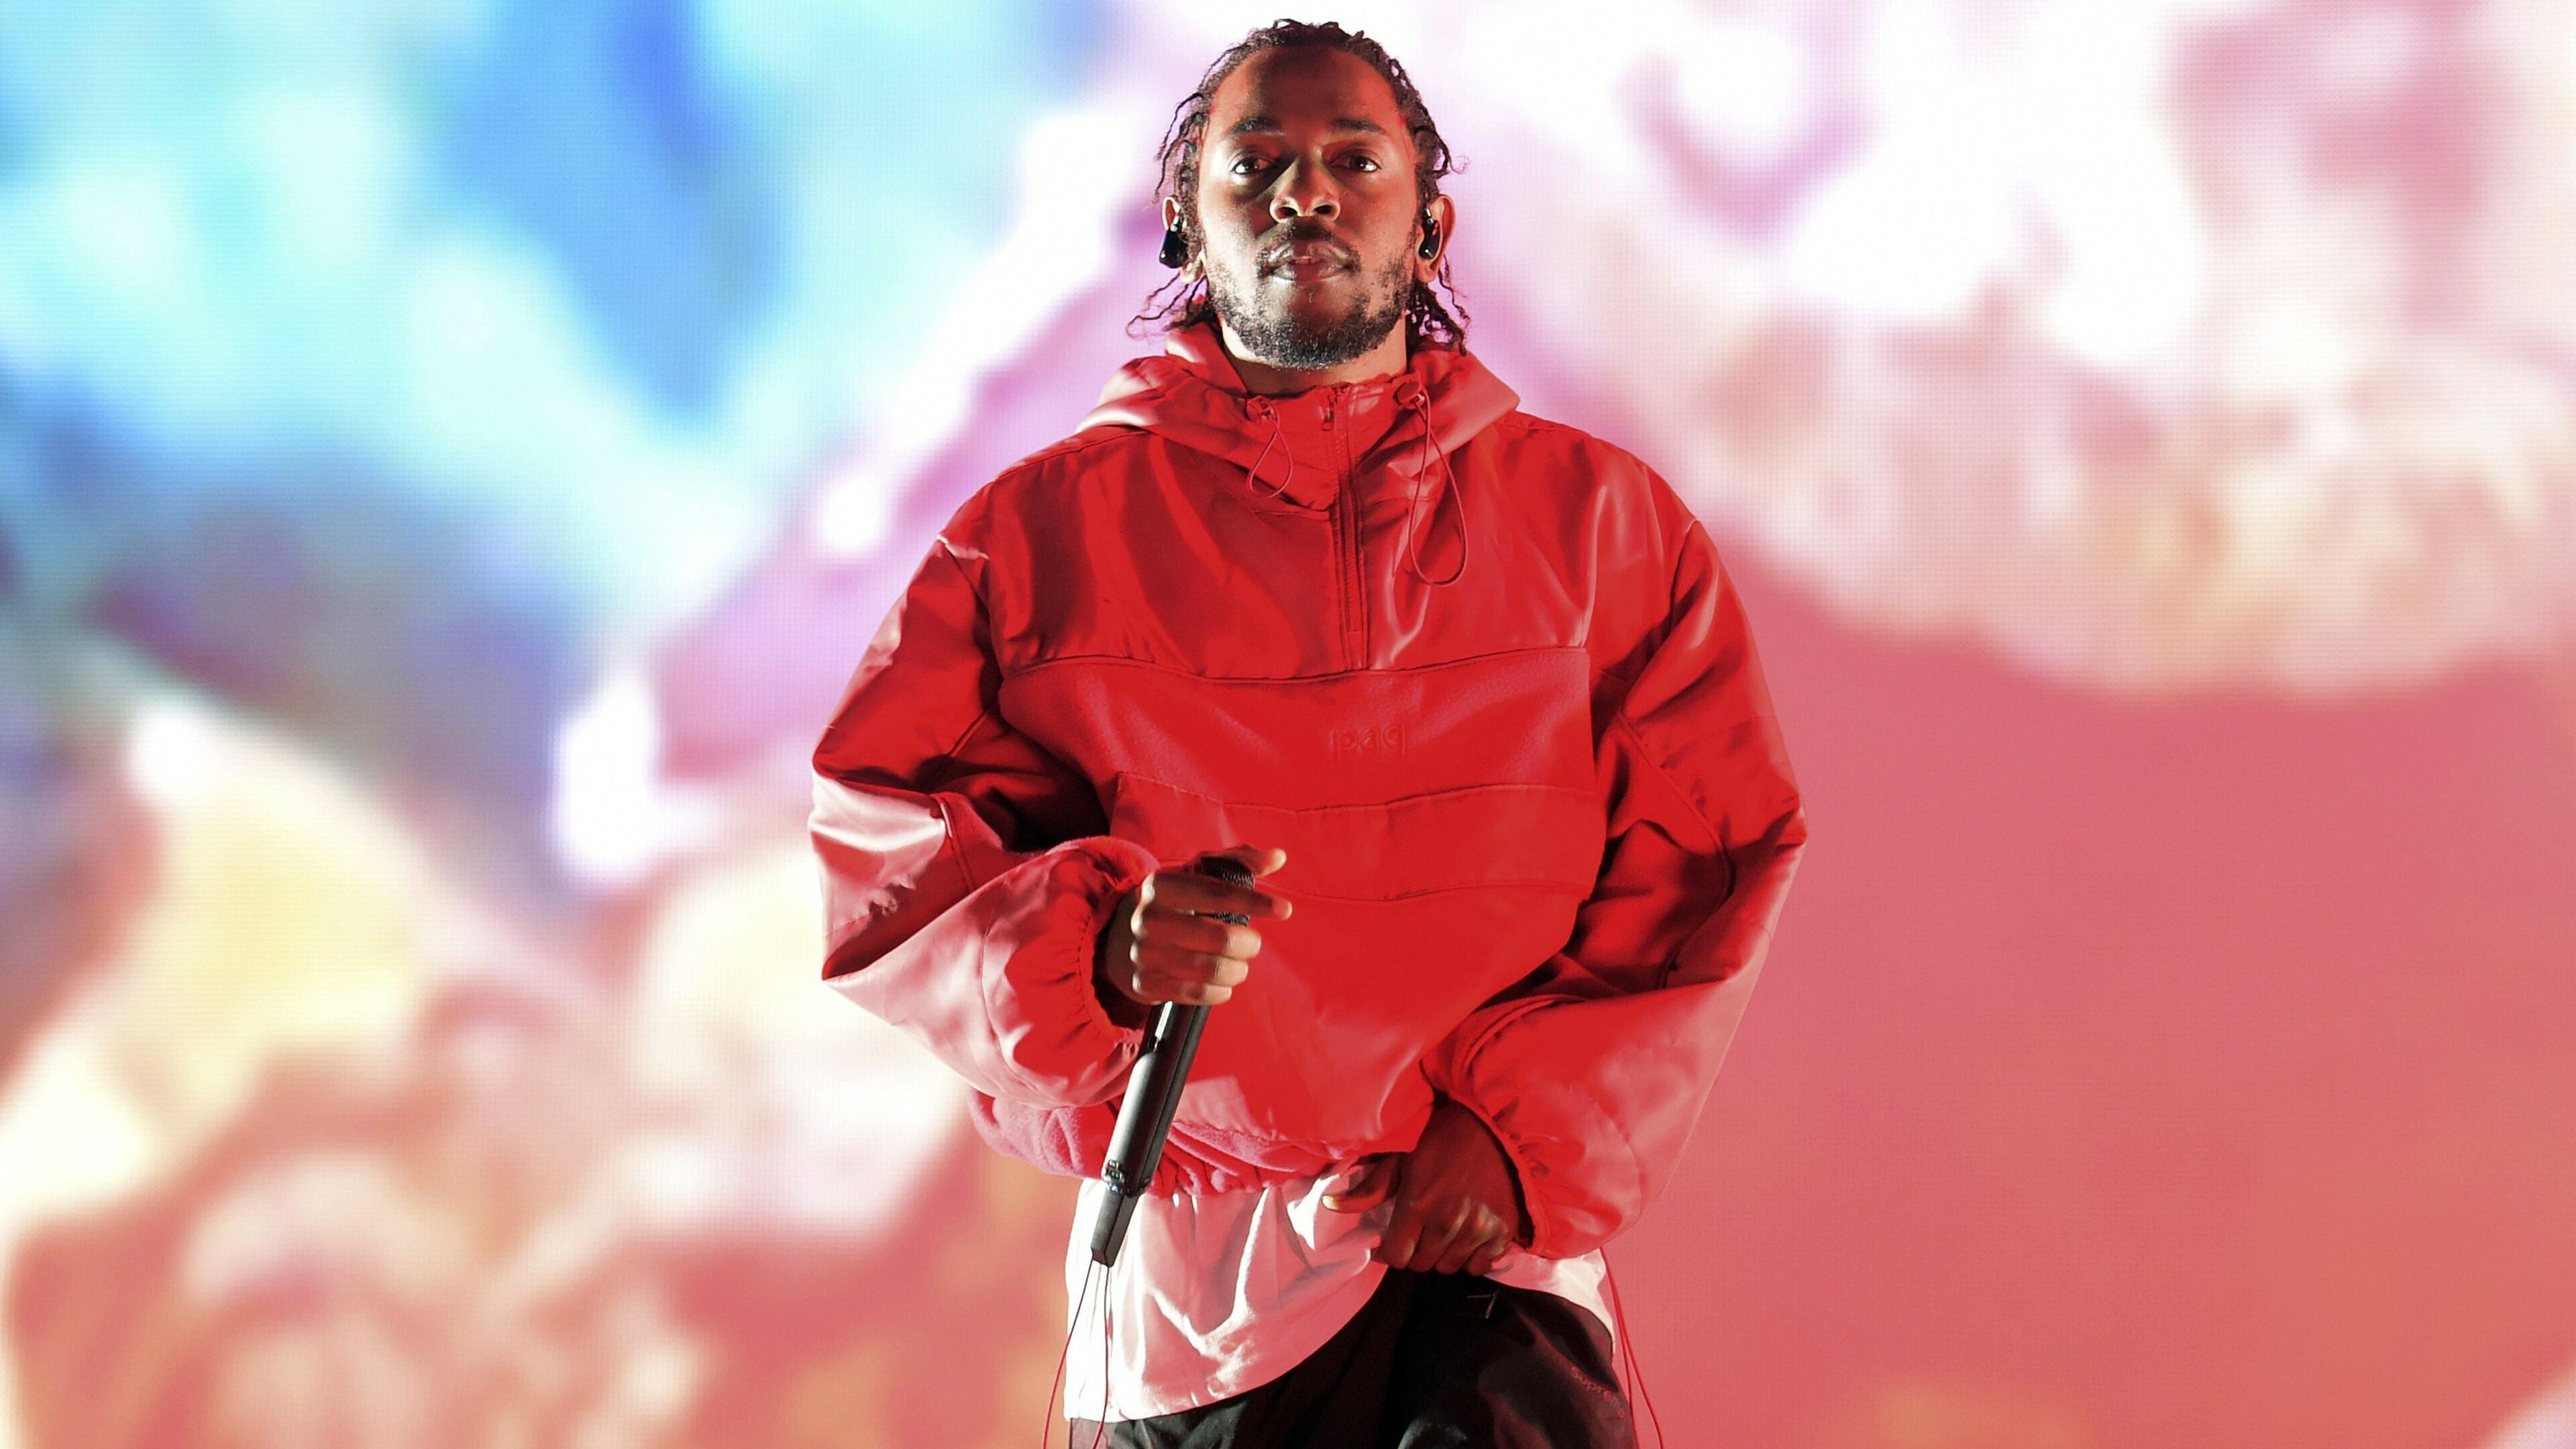 Kendrick Lamar: An American rapper, known for his progressive musical styles and socially conscious songwriting. 3840x2160 4K Background.